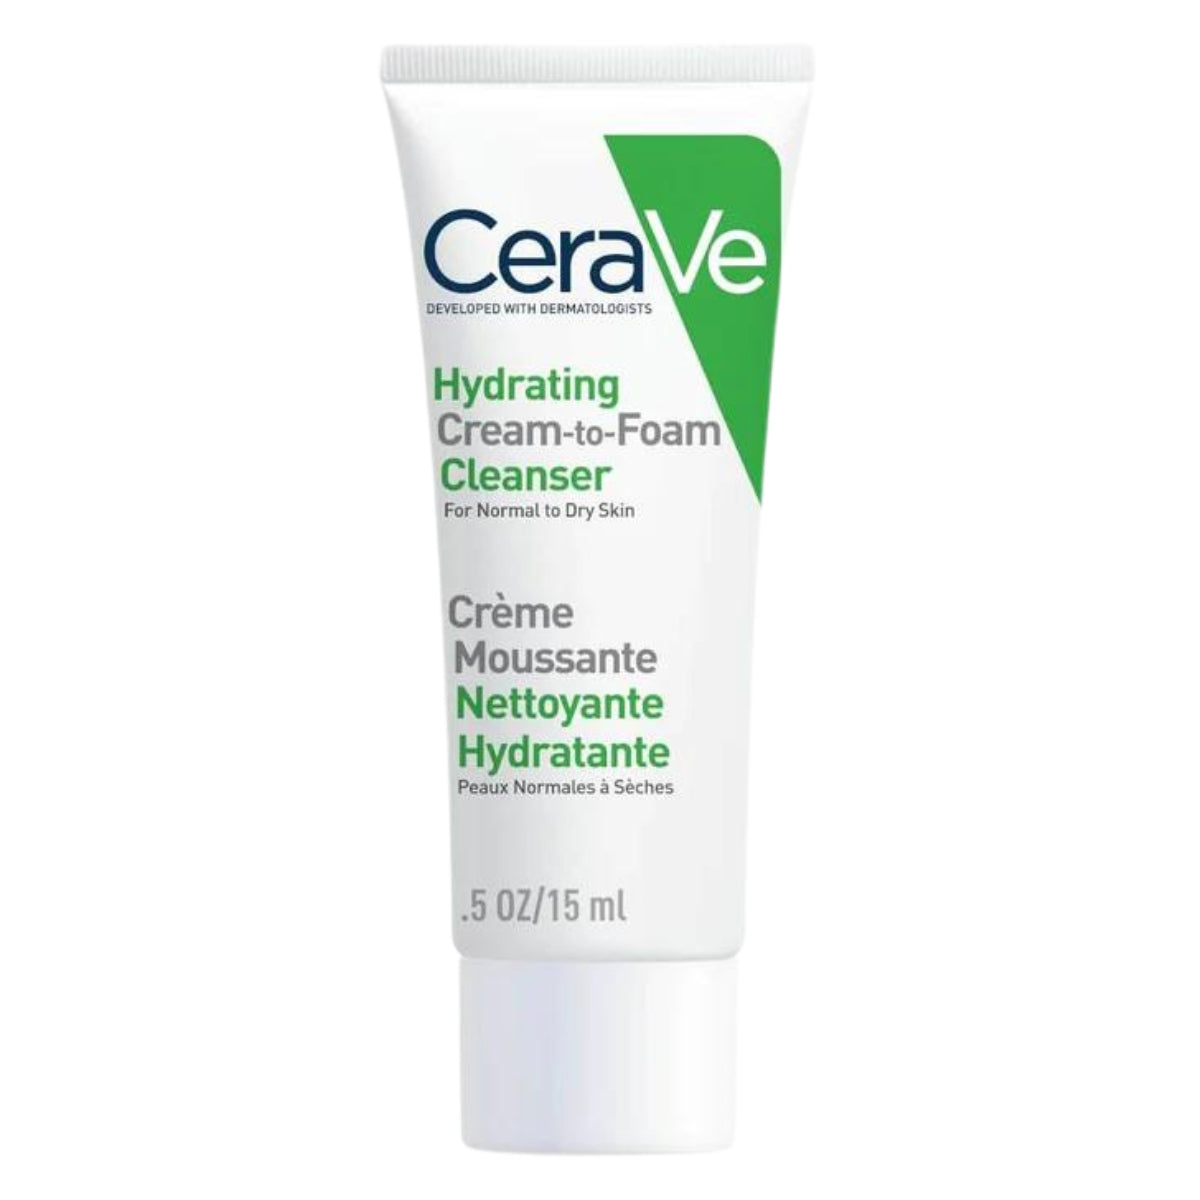 Free CeraVe Hydrating Cream to Foam Cleanser 15ml when you purchase 2 or more products from Cerave. One gift per person. While stocks last.